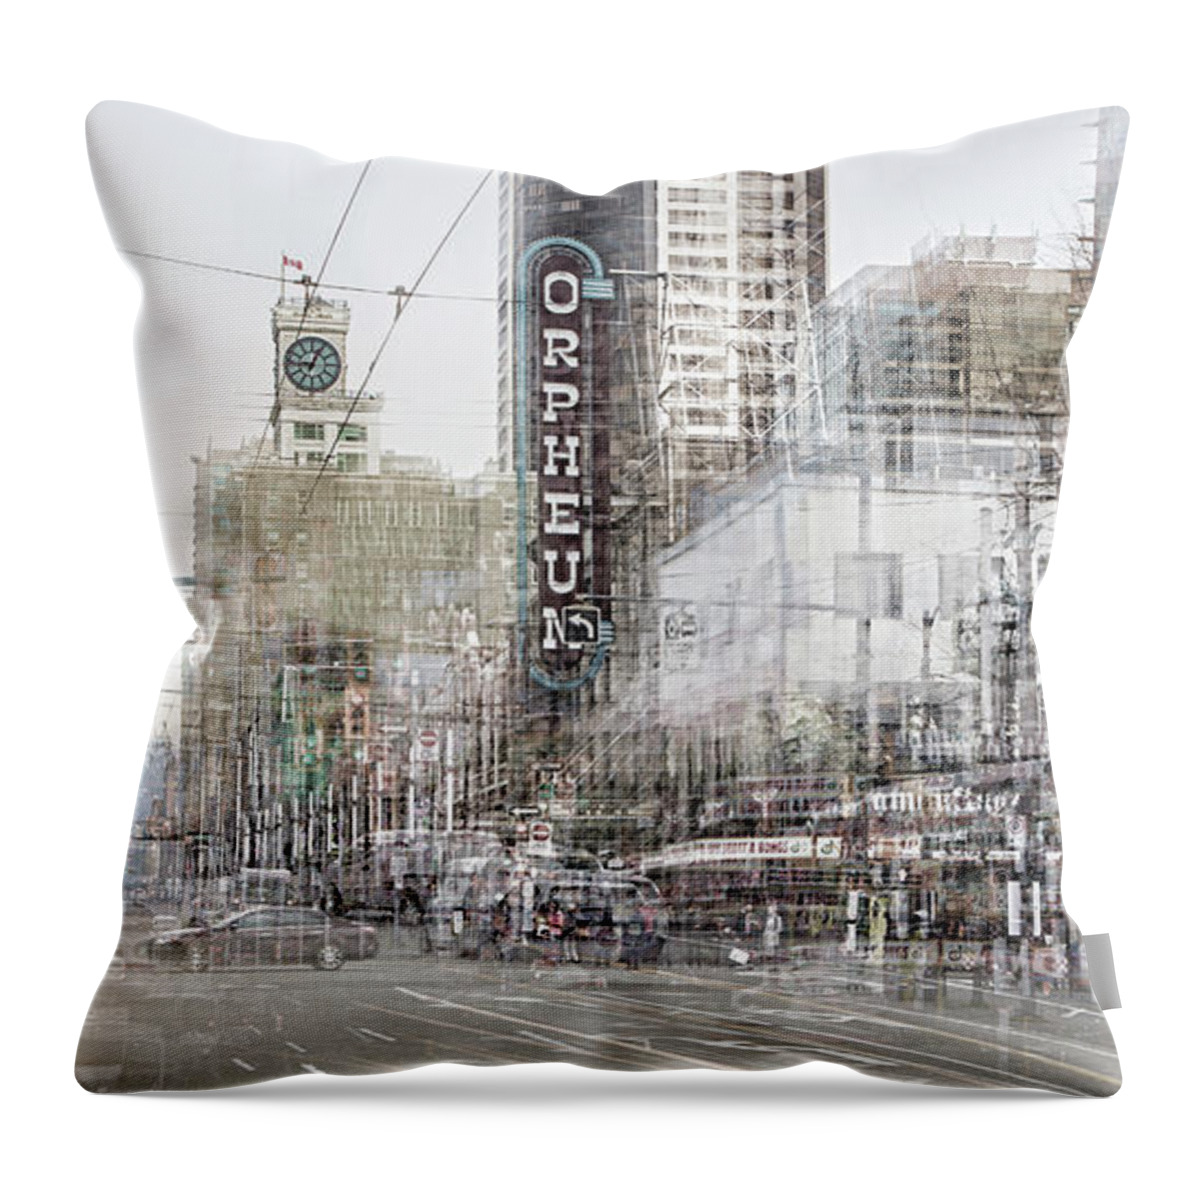 Granville Street Throw Pillow featuring the digital art Granville Street by Phil Dyer